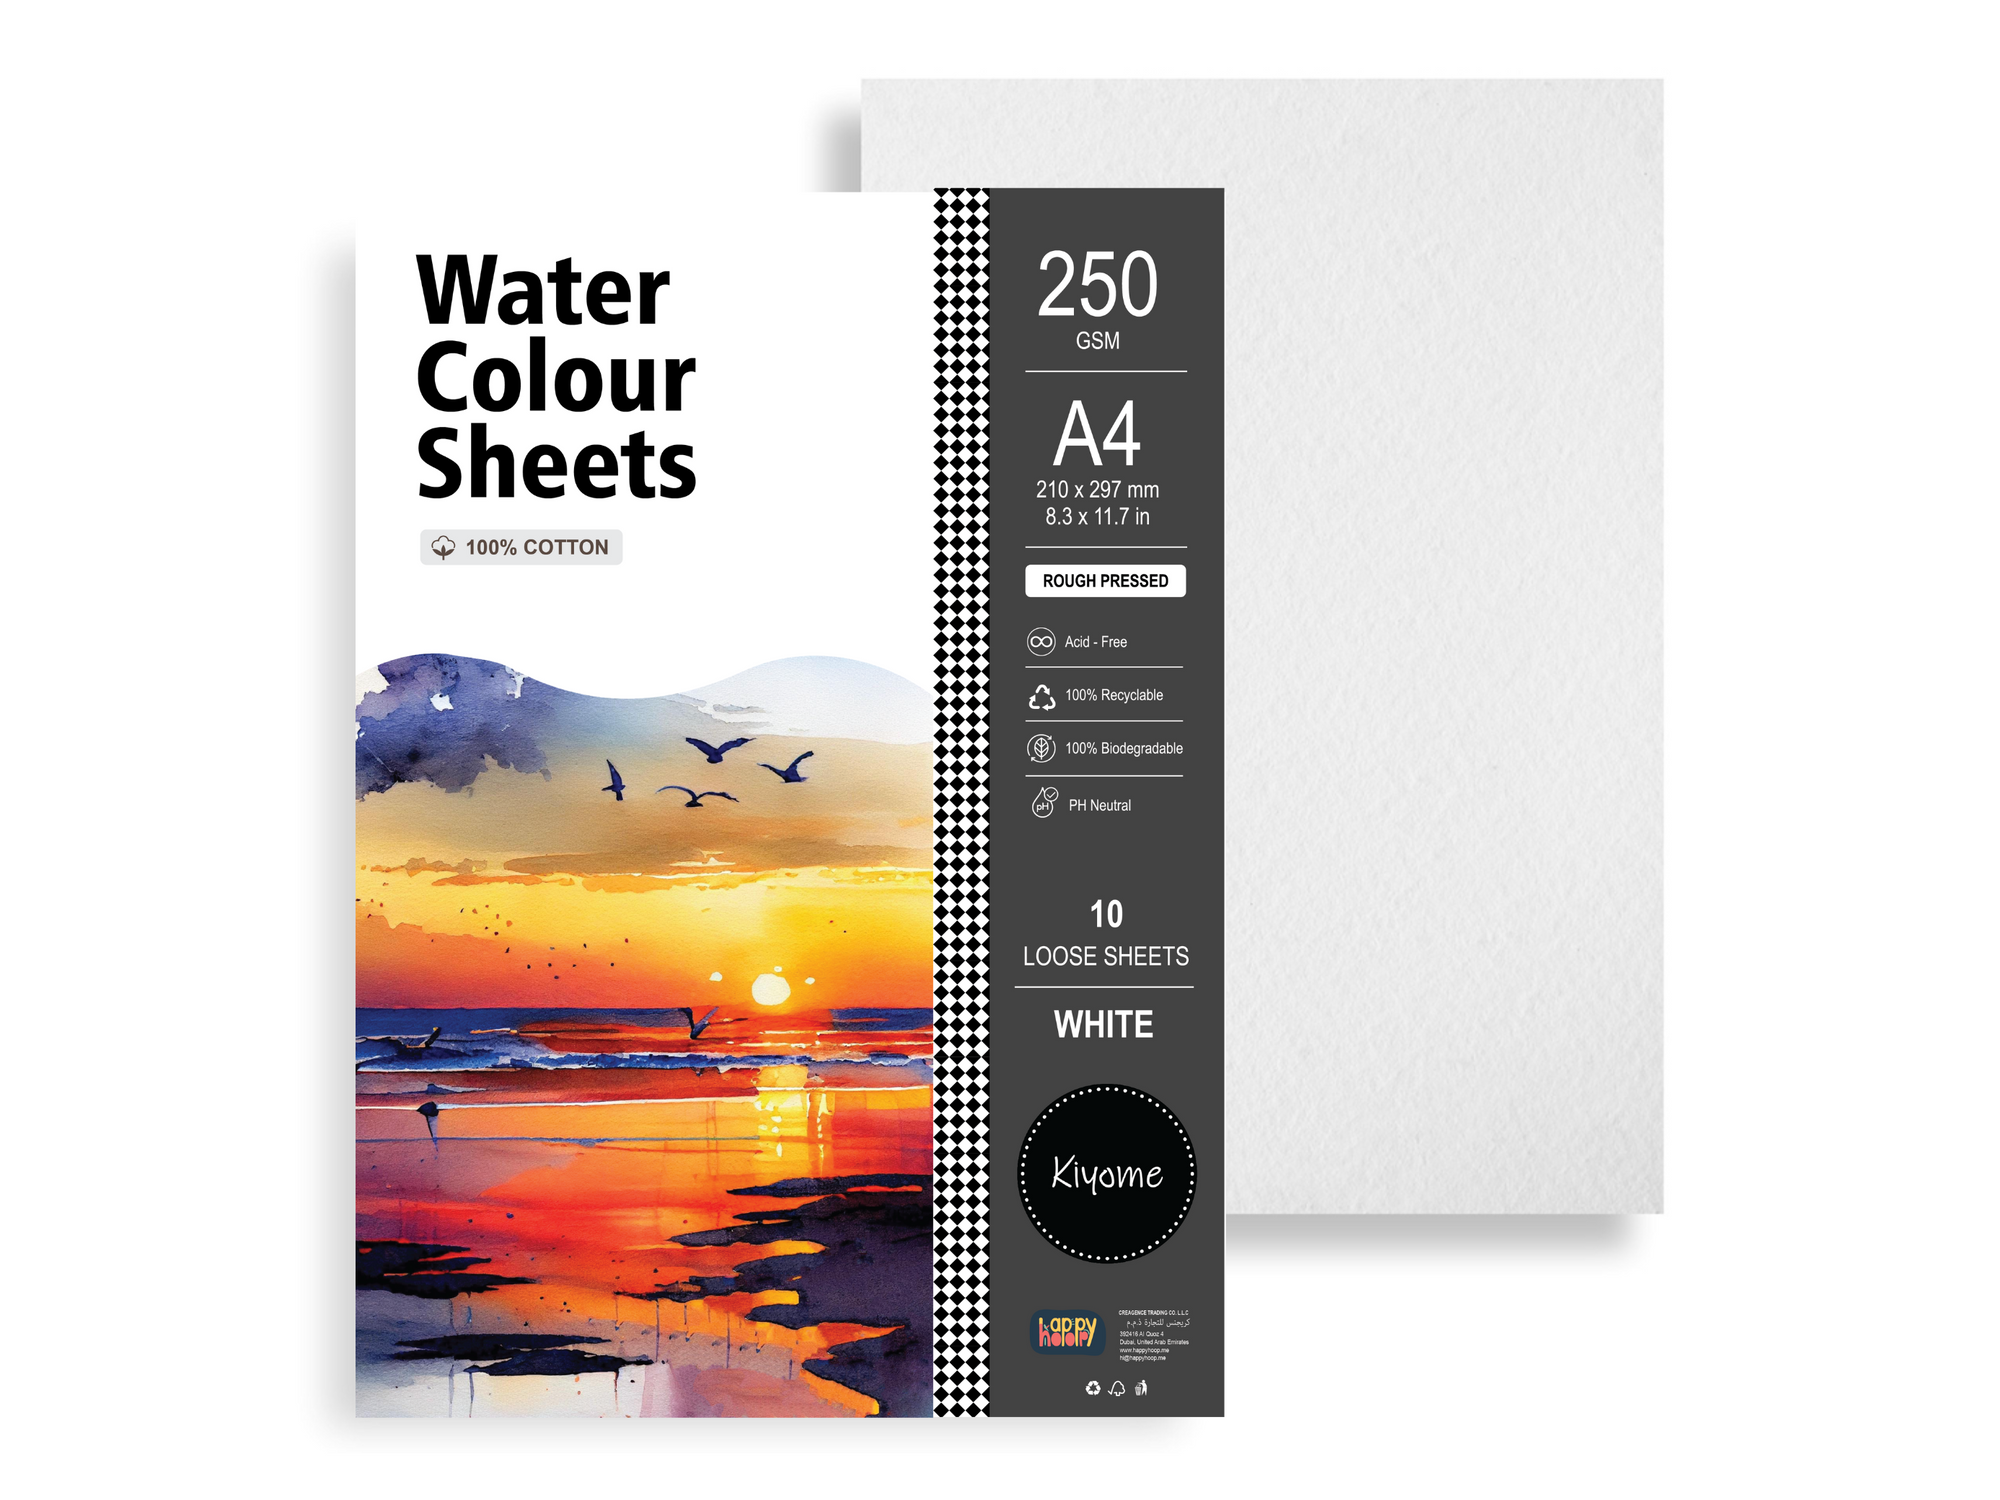 Kiyome 100% Cotton Watercolor Sheets | Rough Pressed | 250 GSM | A4 | 10 Sheets